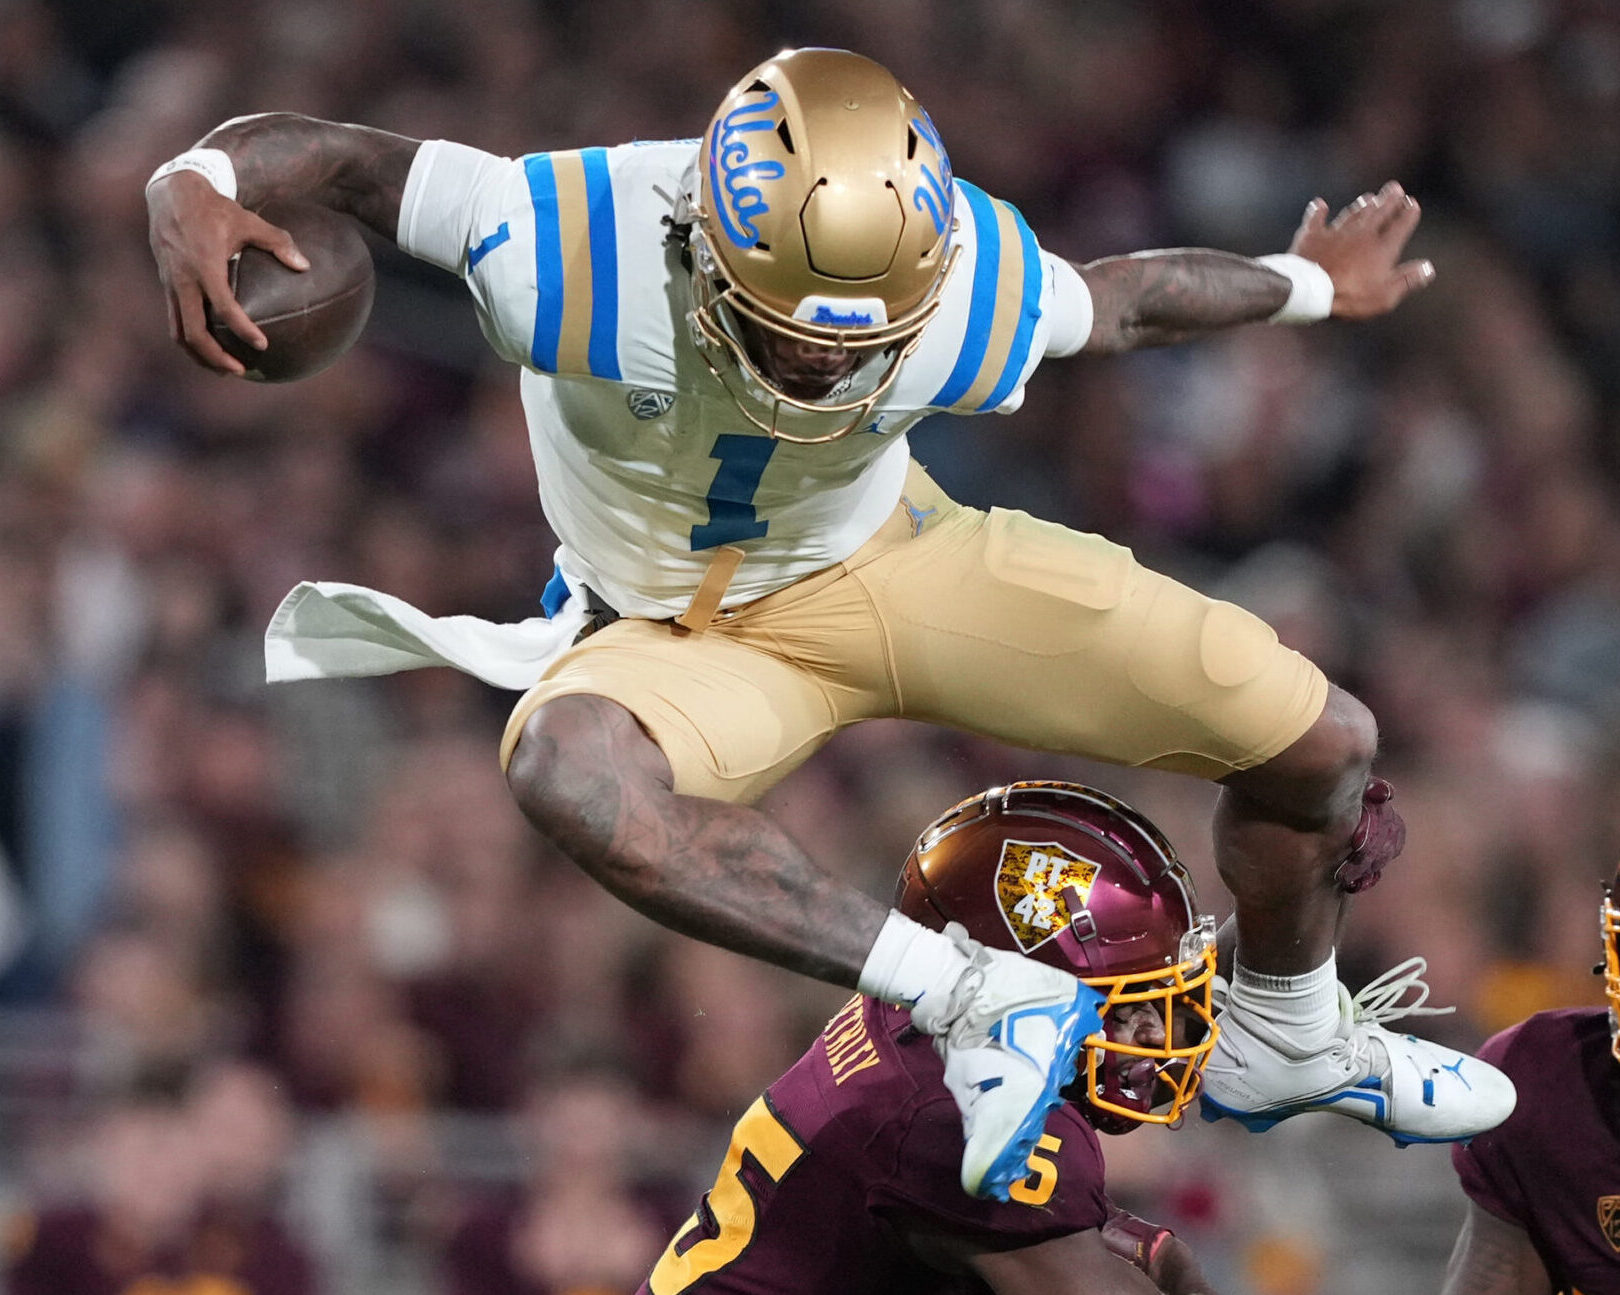 UCLA's Underrated  QB Top-5 Playmaker in Draft